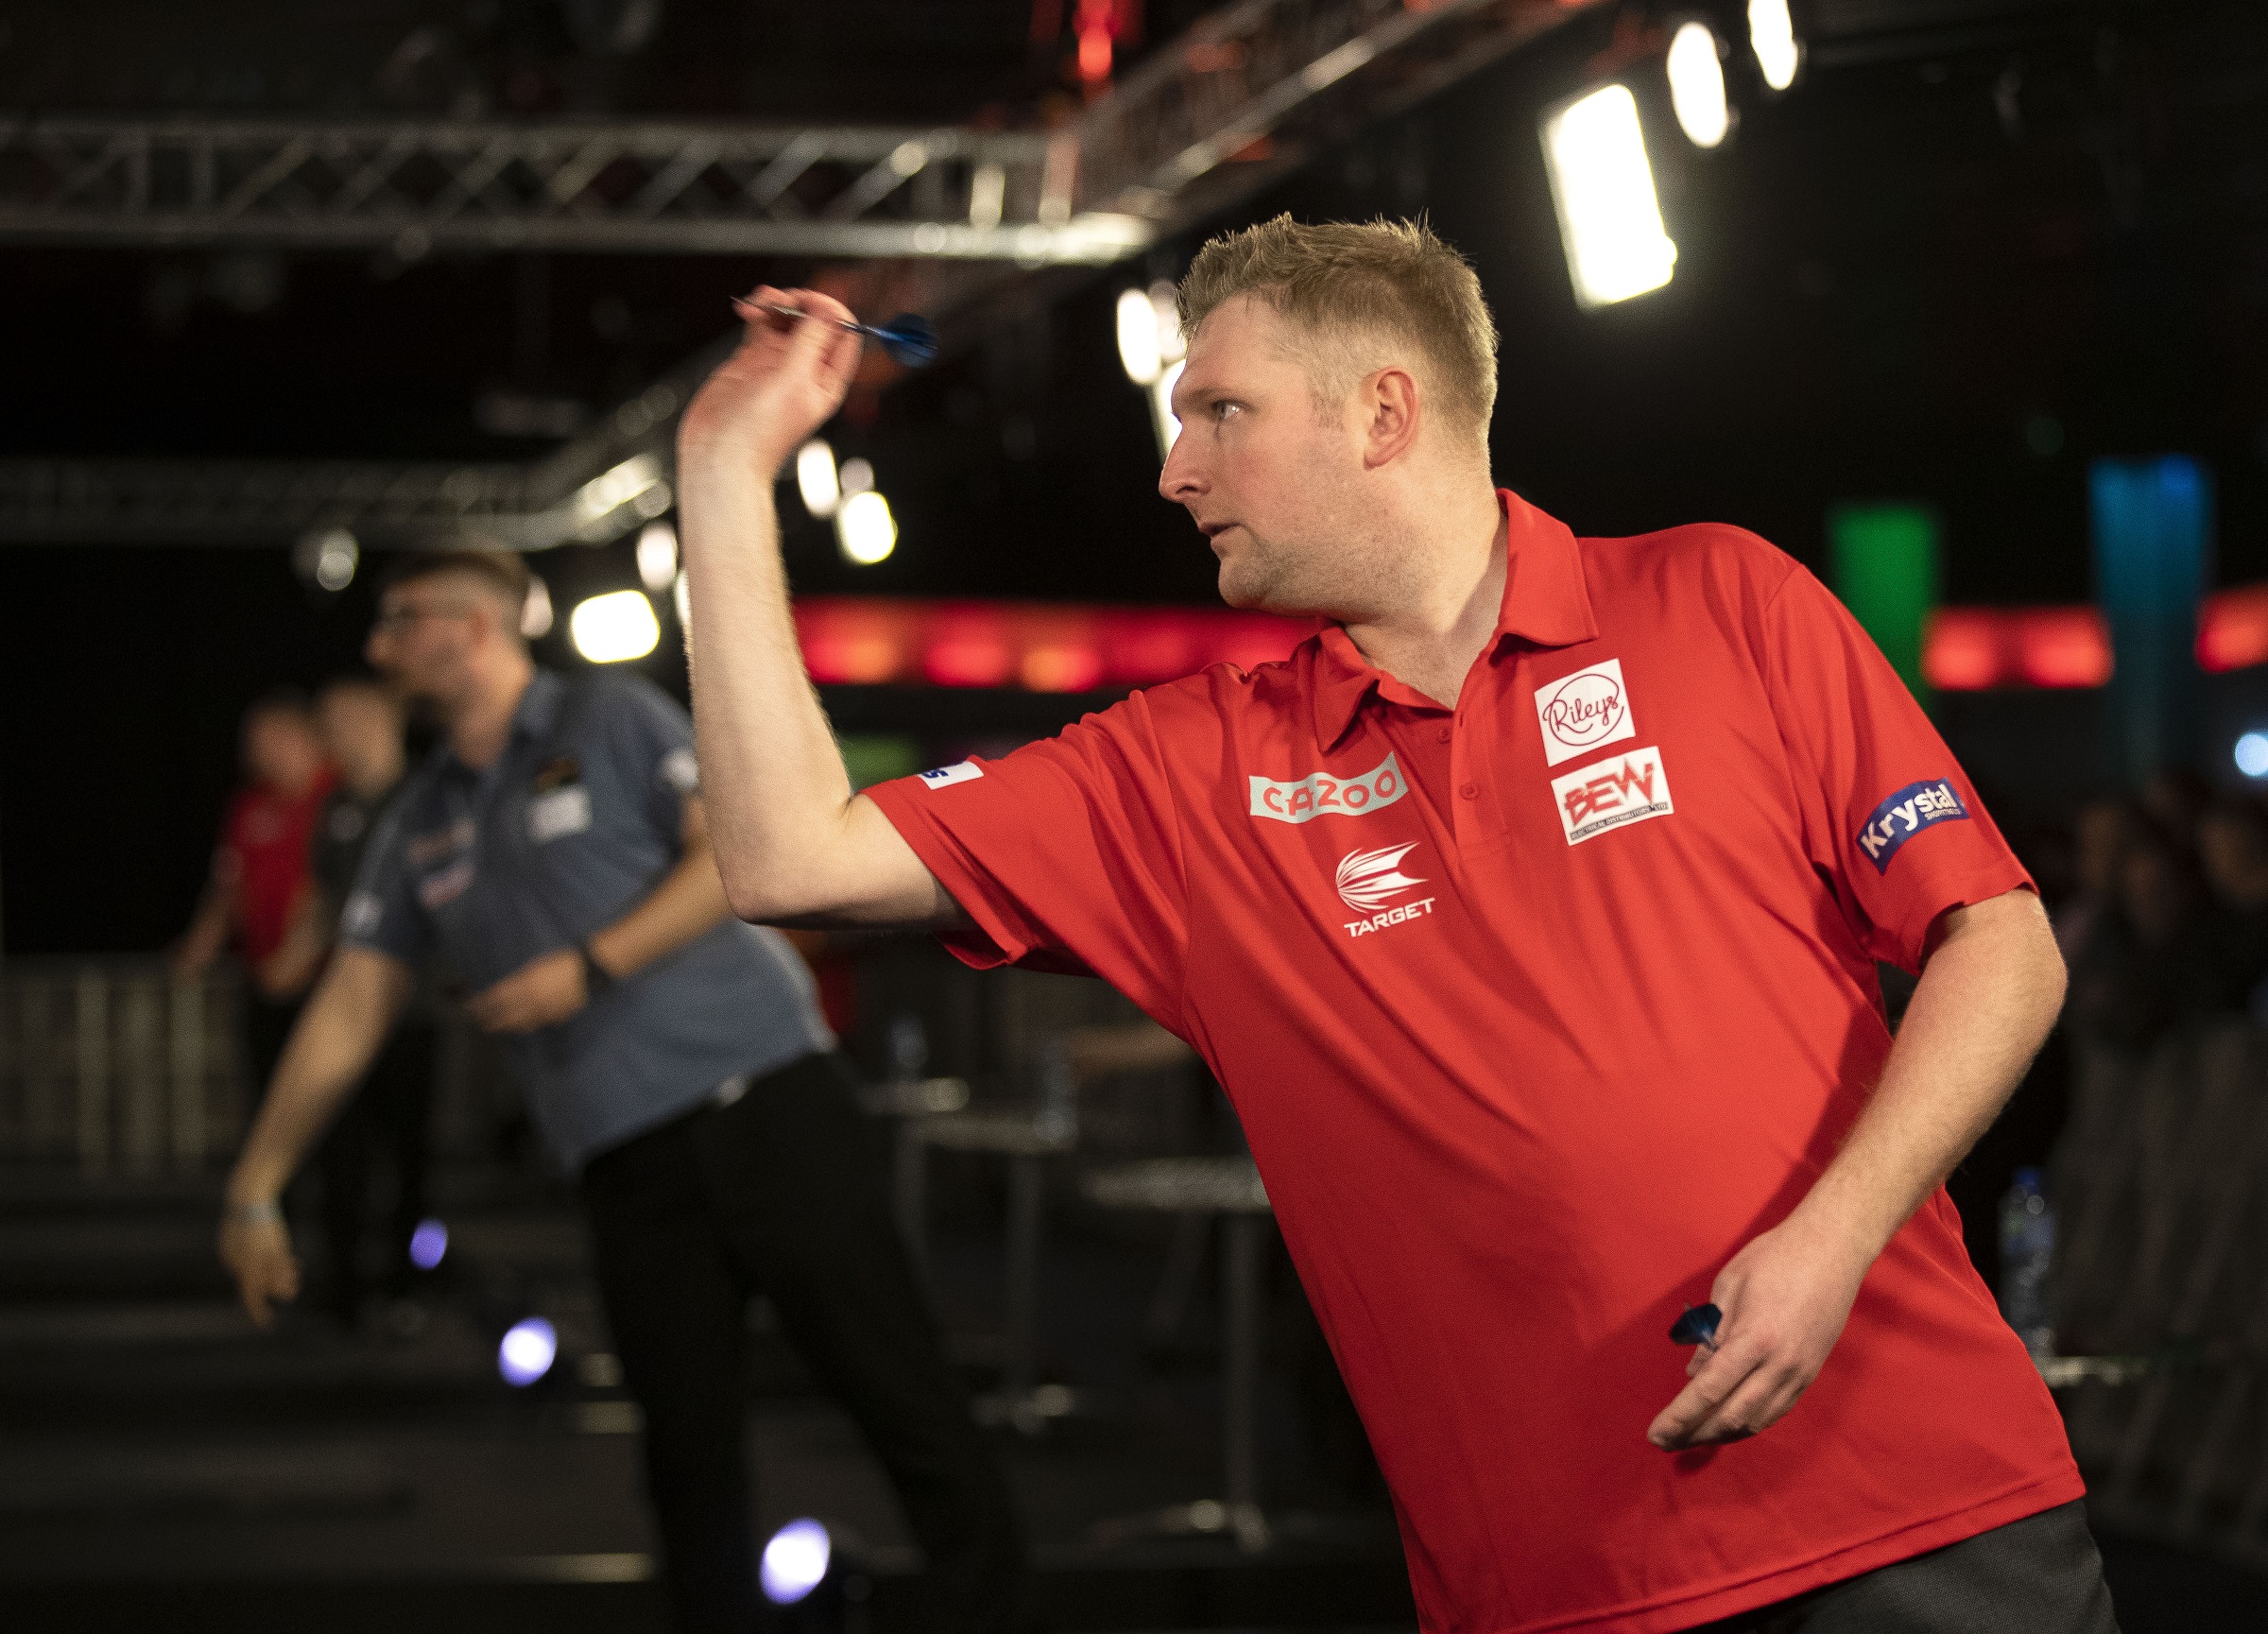 2023 Rileys Amateur Qualifiers confirmed for Cazoo UK Open PDC